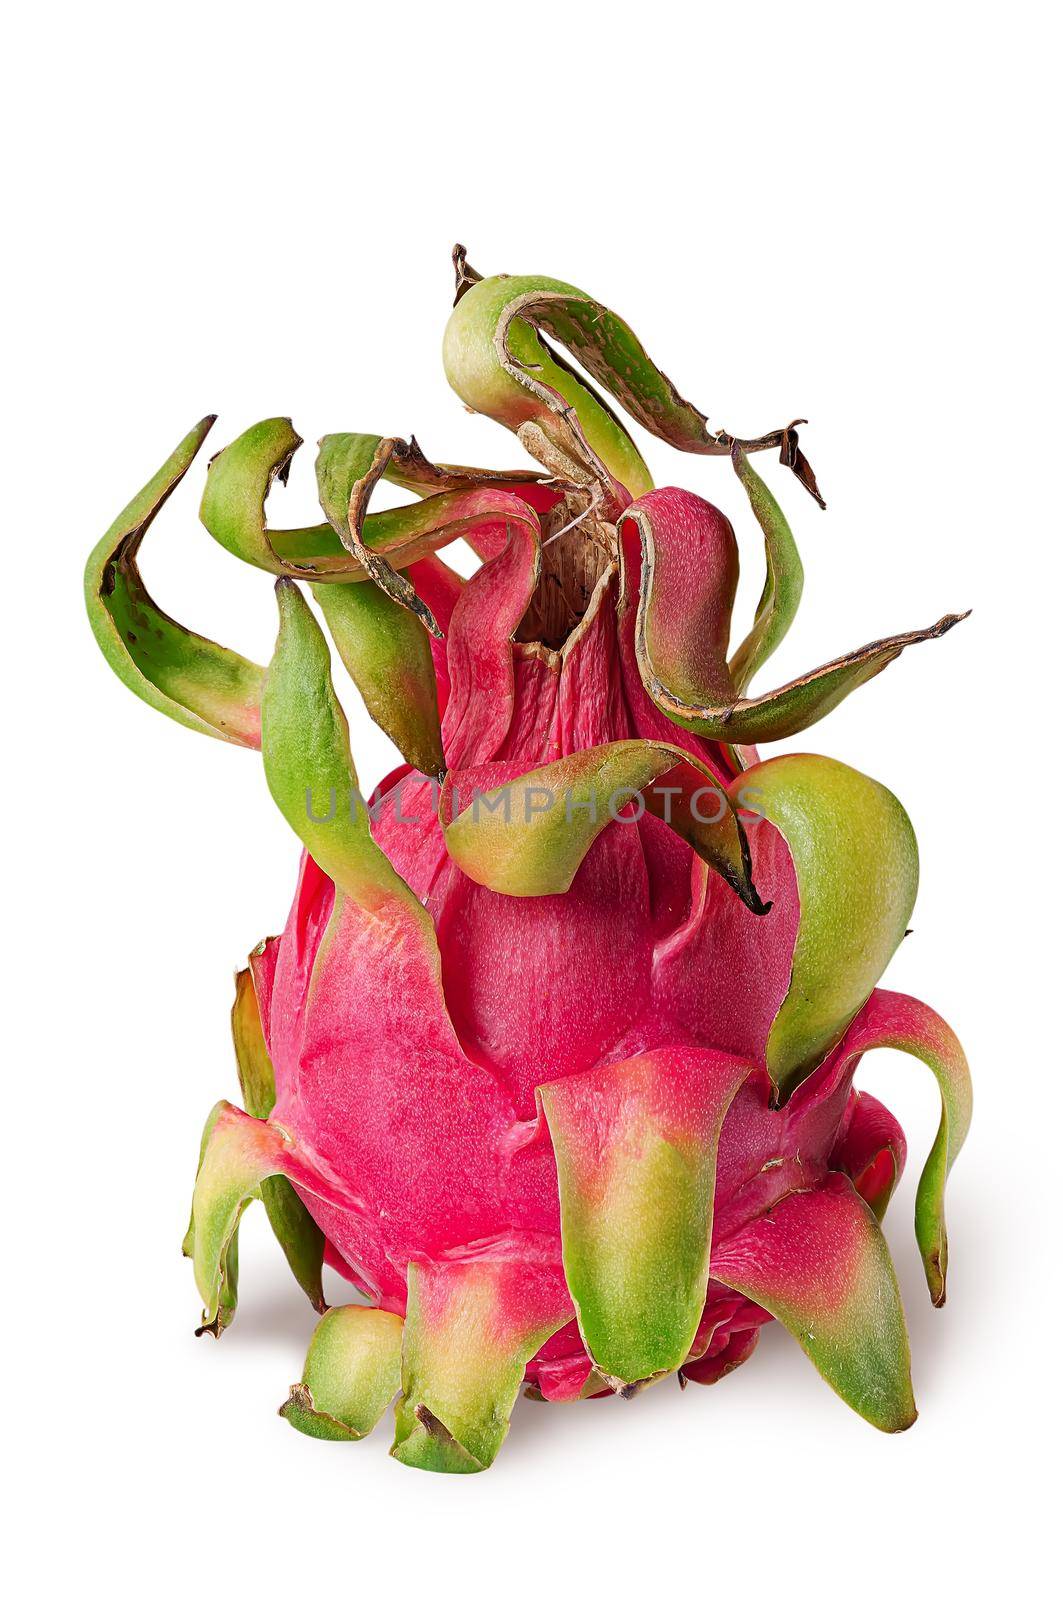 Dragon fruit vertically isolated on white background